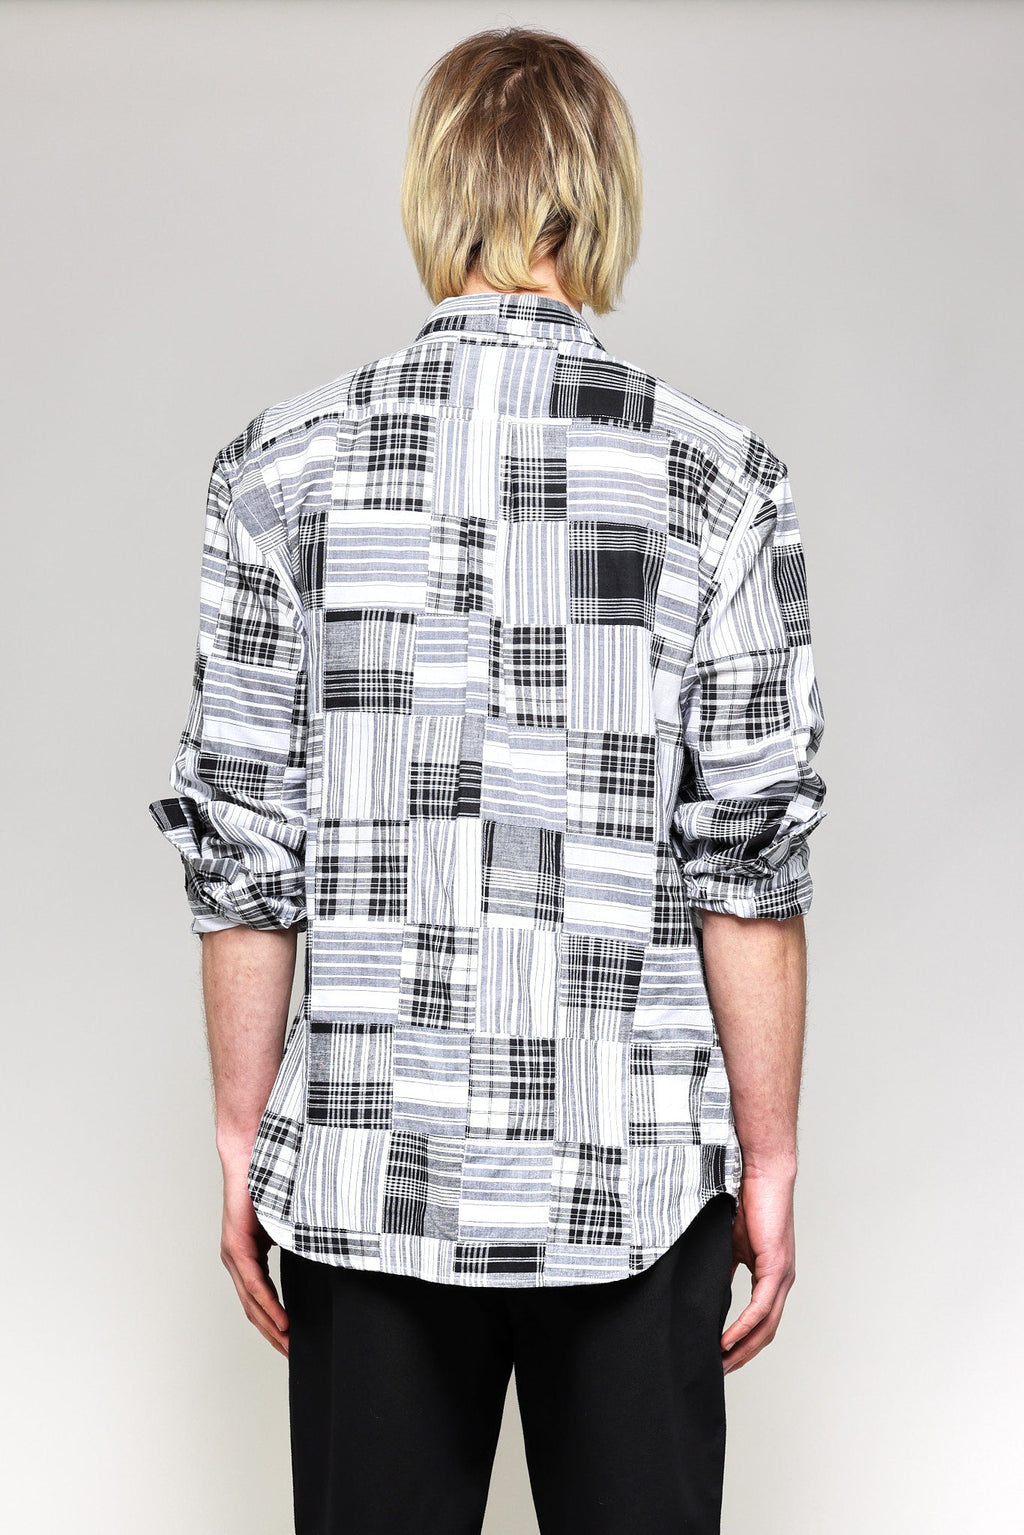 Japanese Patchwork Plaid in Black and White 03